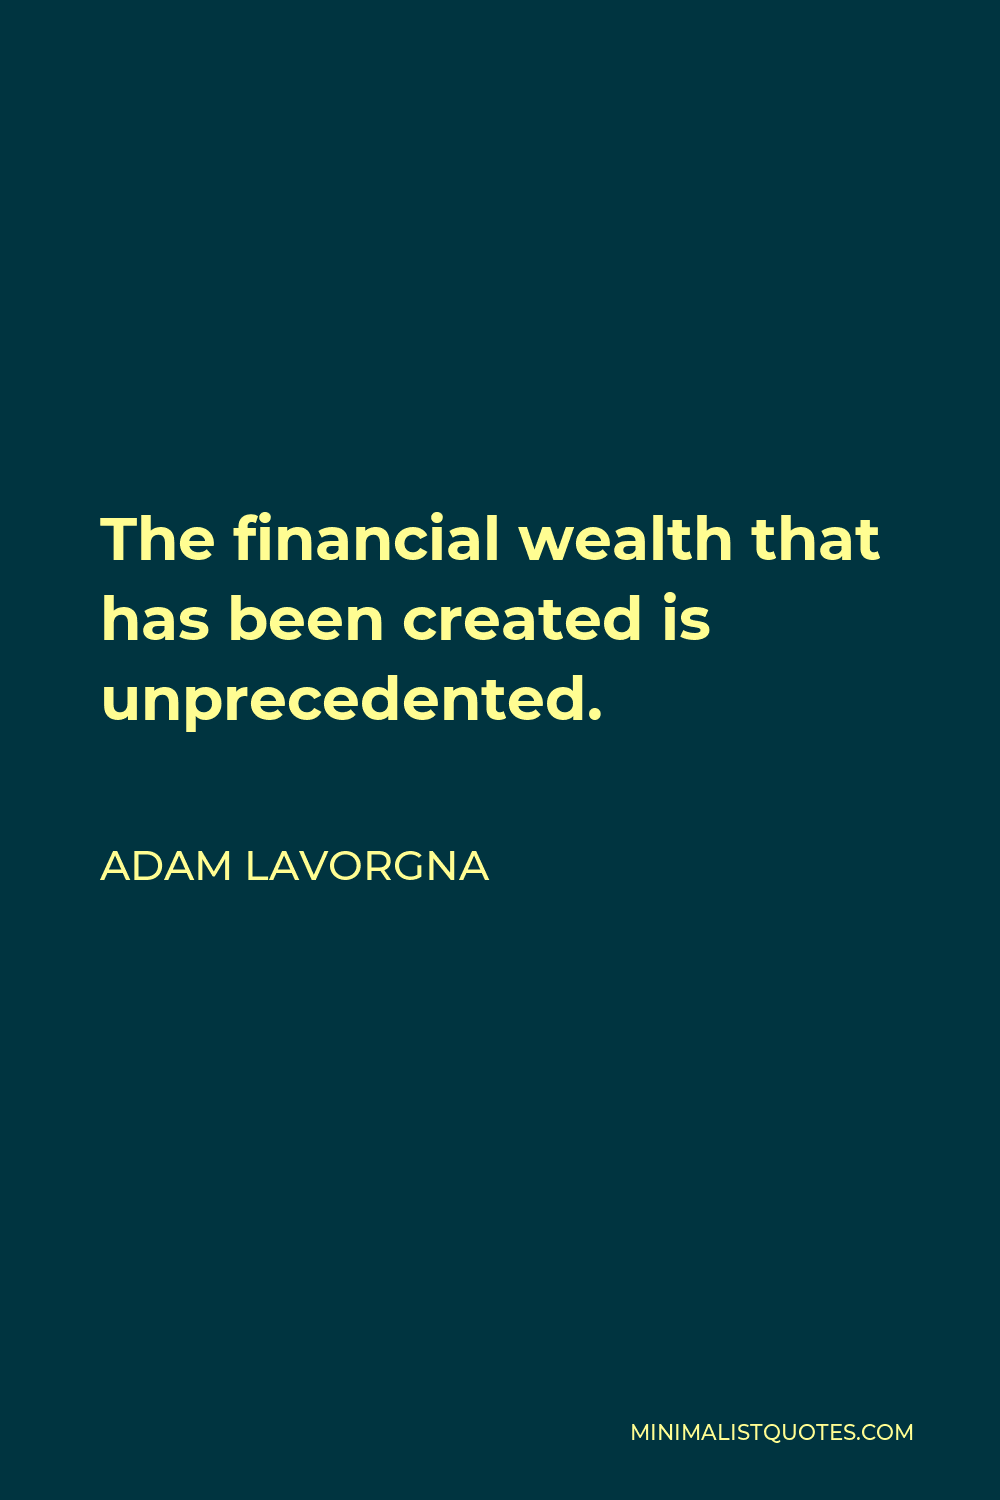 Adam LaVorgna Quote - The financial wealth that has been created is unprecedented.